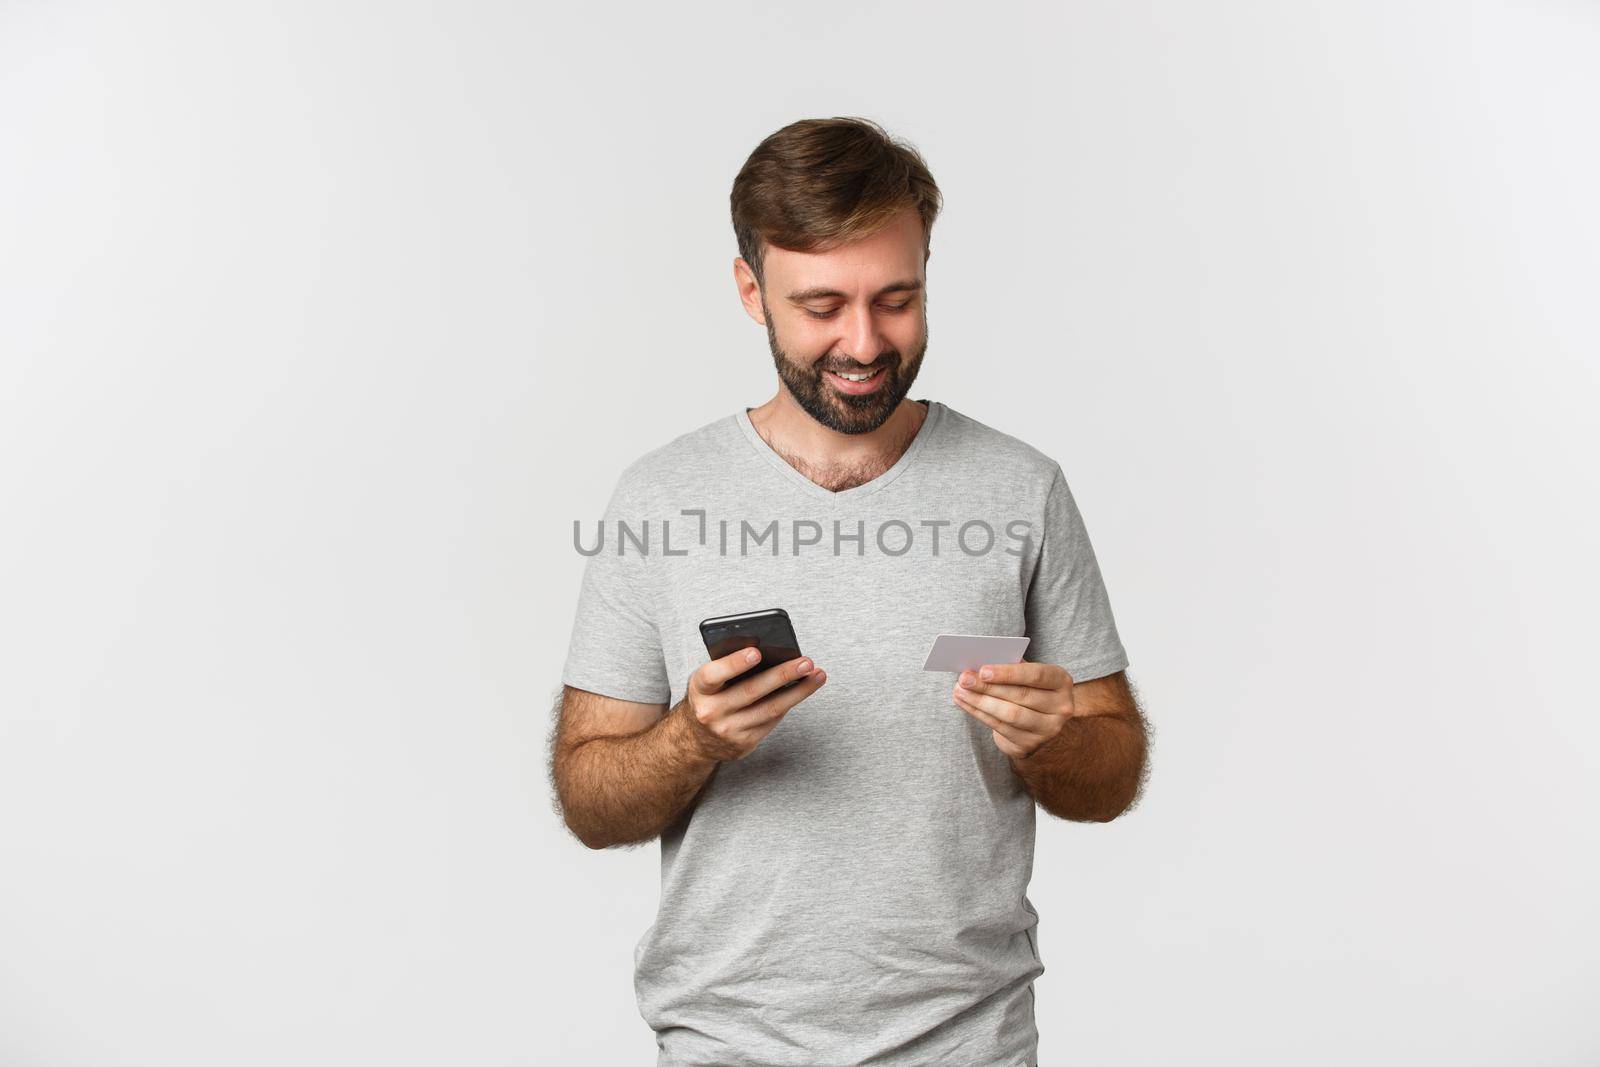 Handsome young man shopping online, holding credit card and mobile phone, standing over white background.